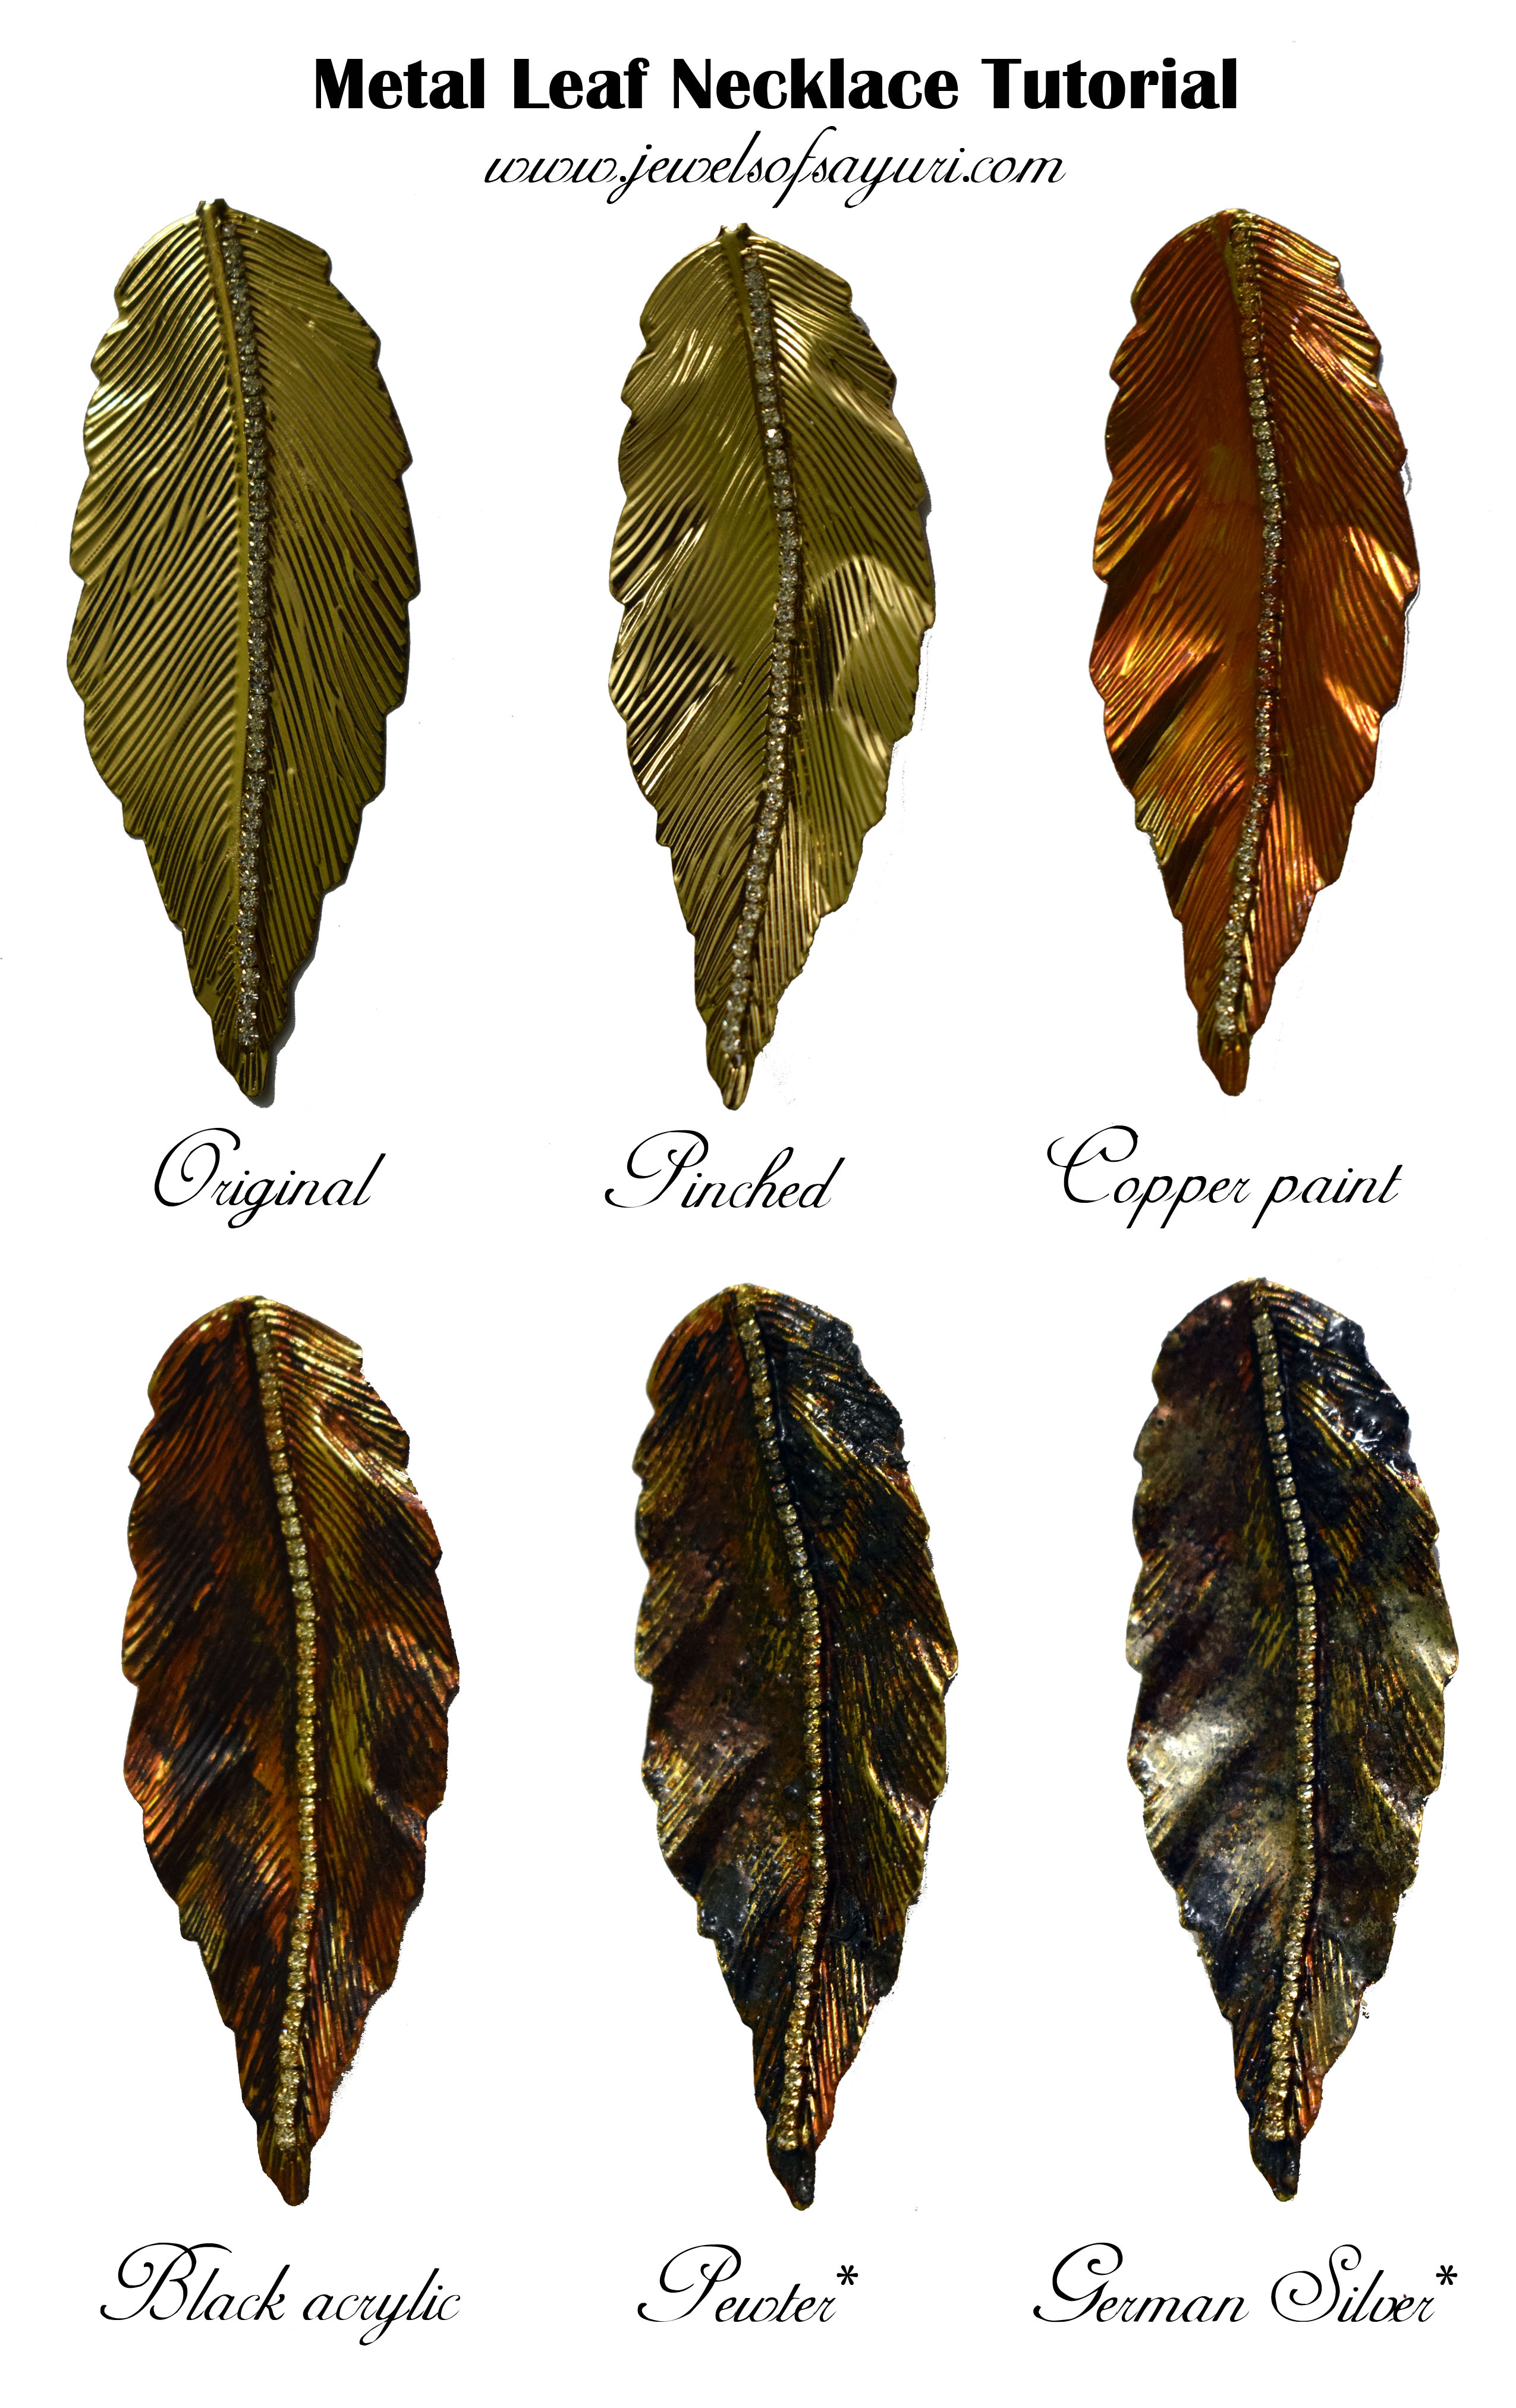 coloring metal with patina inks and paint